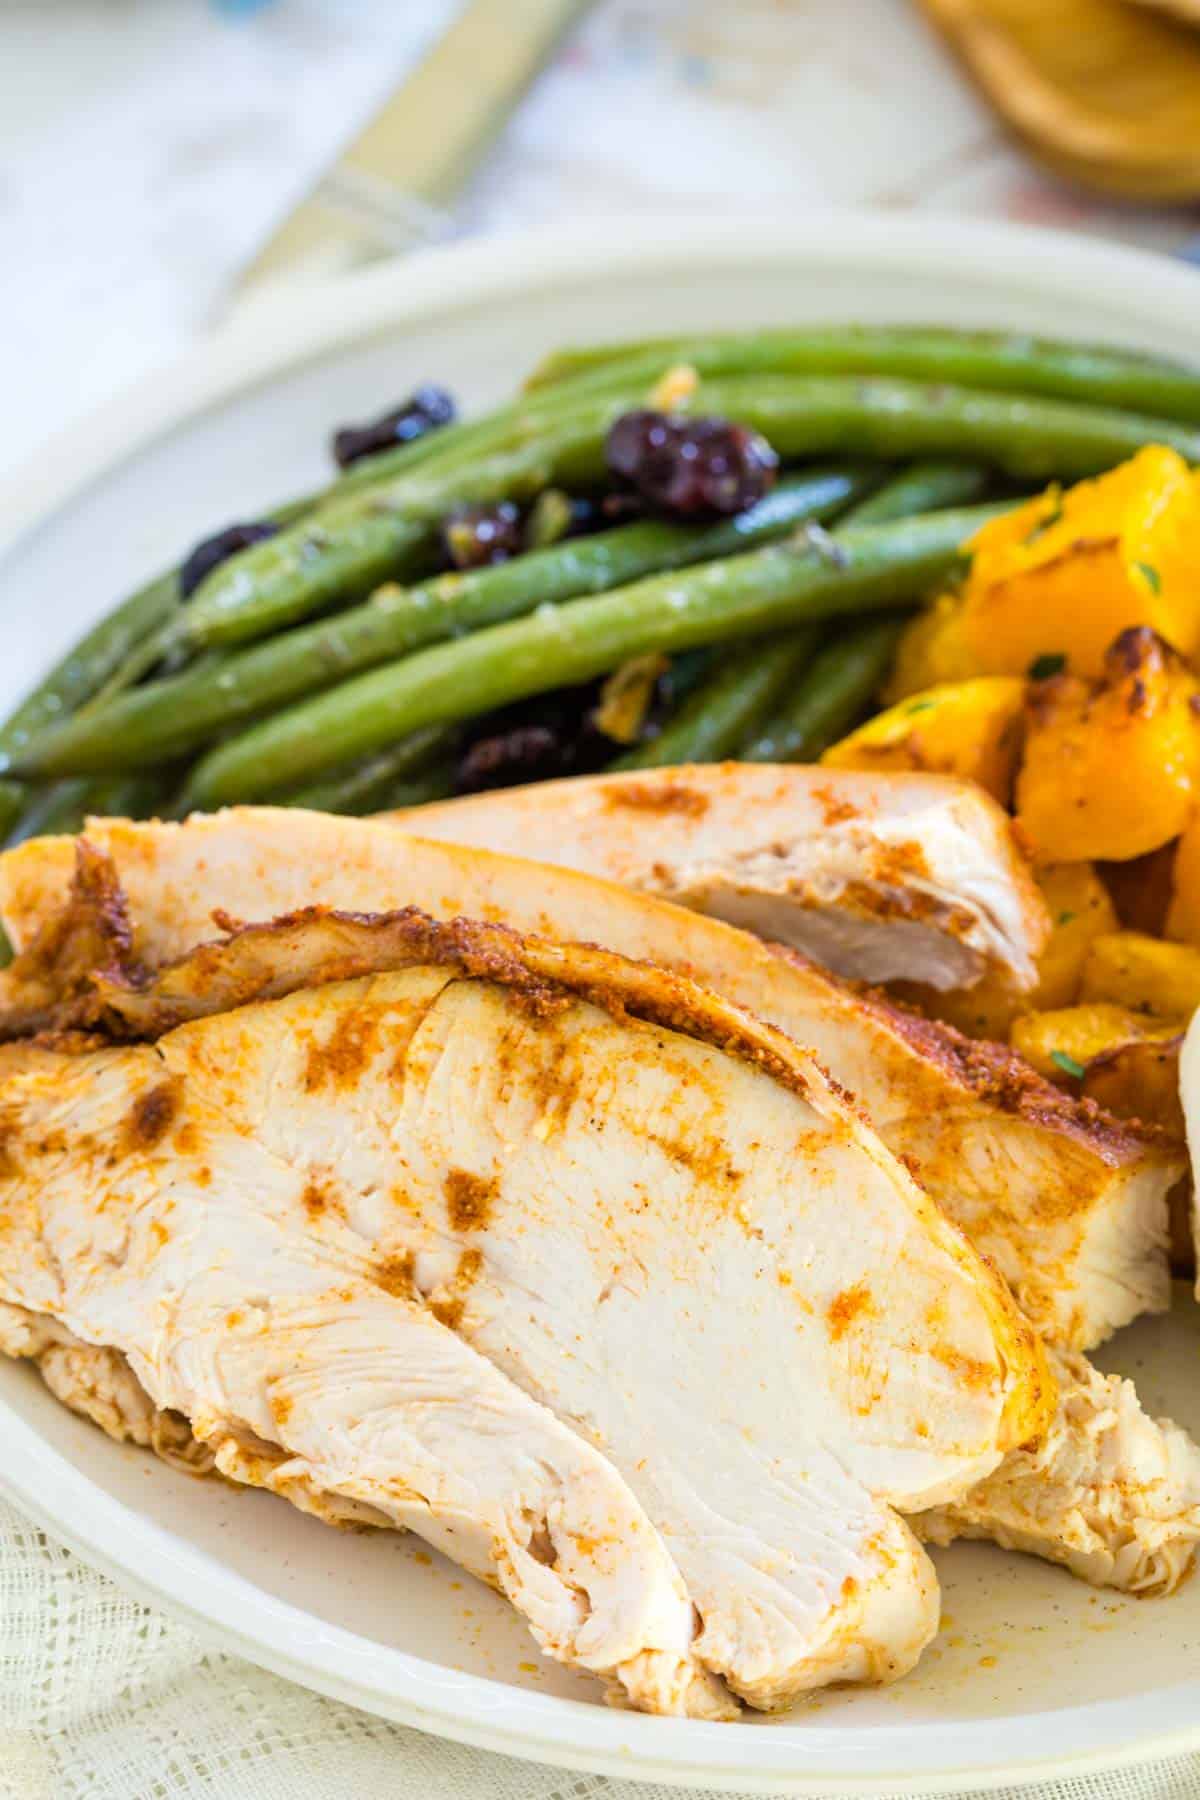 Turkey, green beans and roasted squash on a plate.